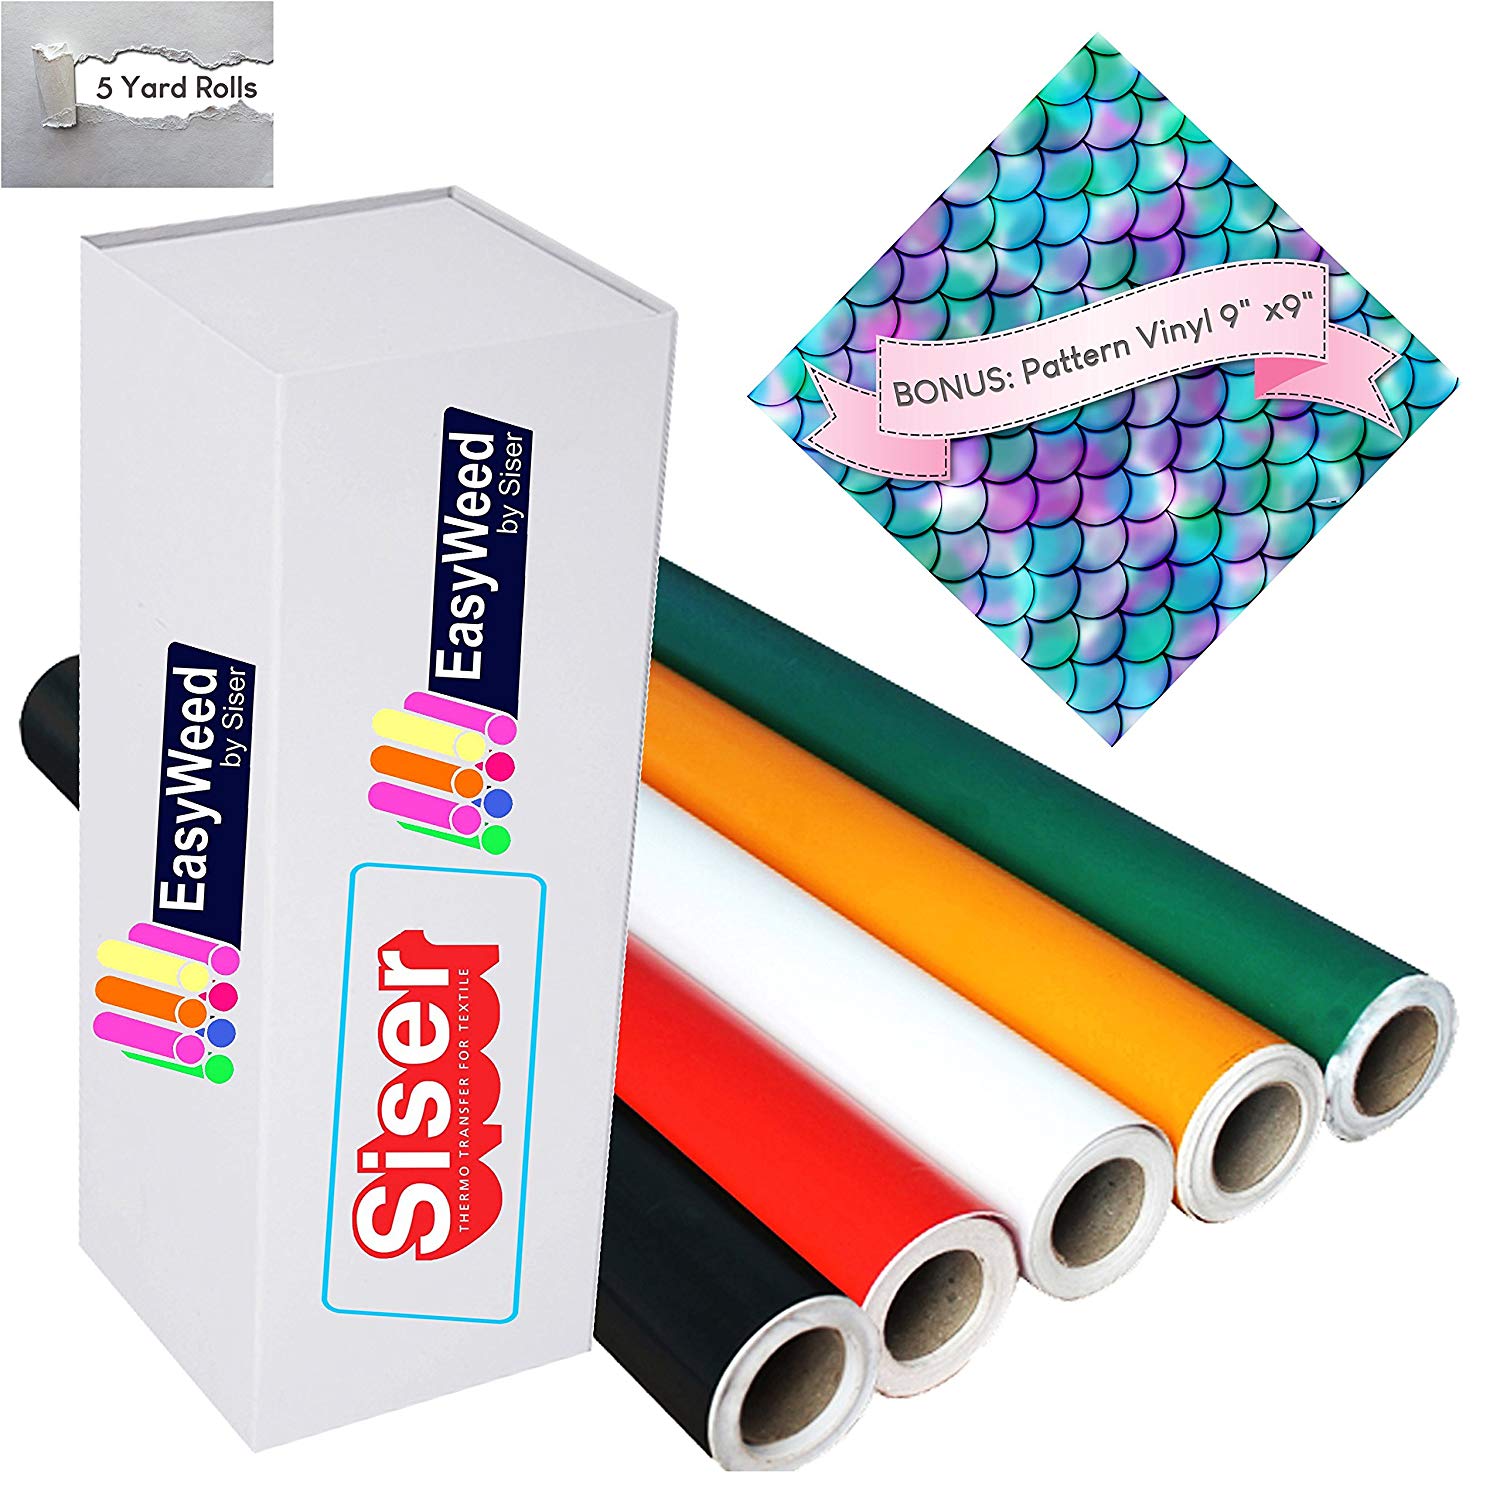 CLOSEOUT - 15 SHEETS OR ROLLS SISER EASYWEED HTV